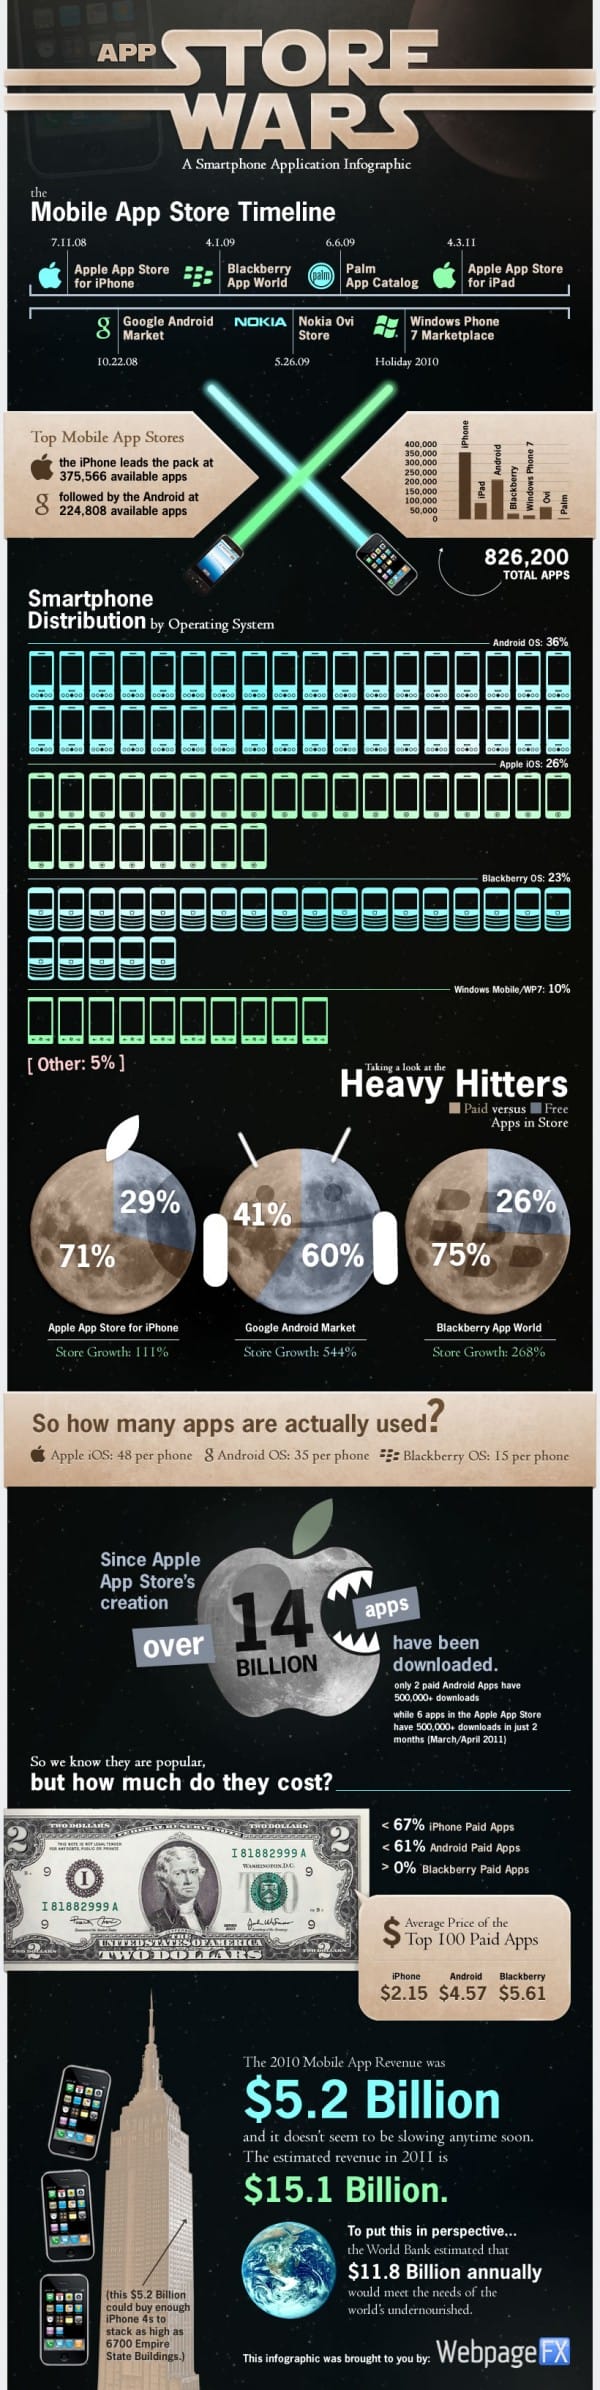 App Store Wars - Who controls the market? - infographic